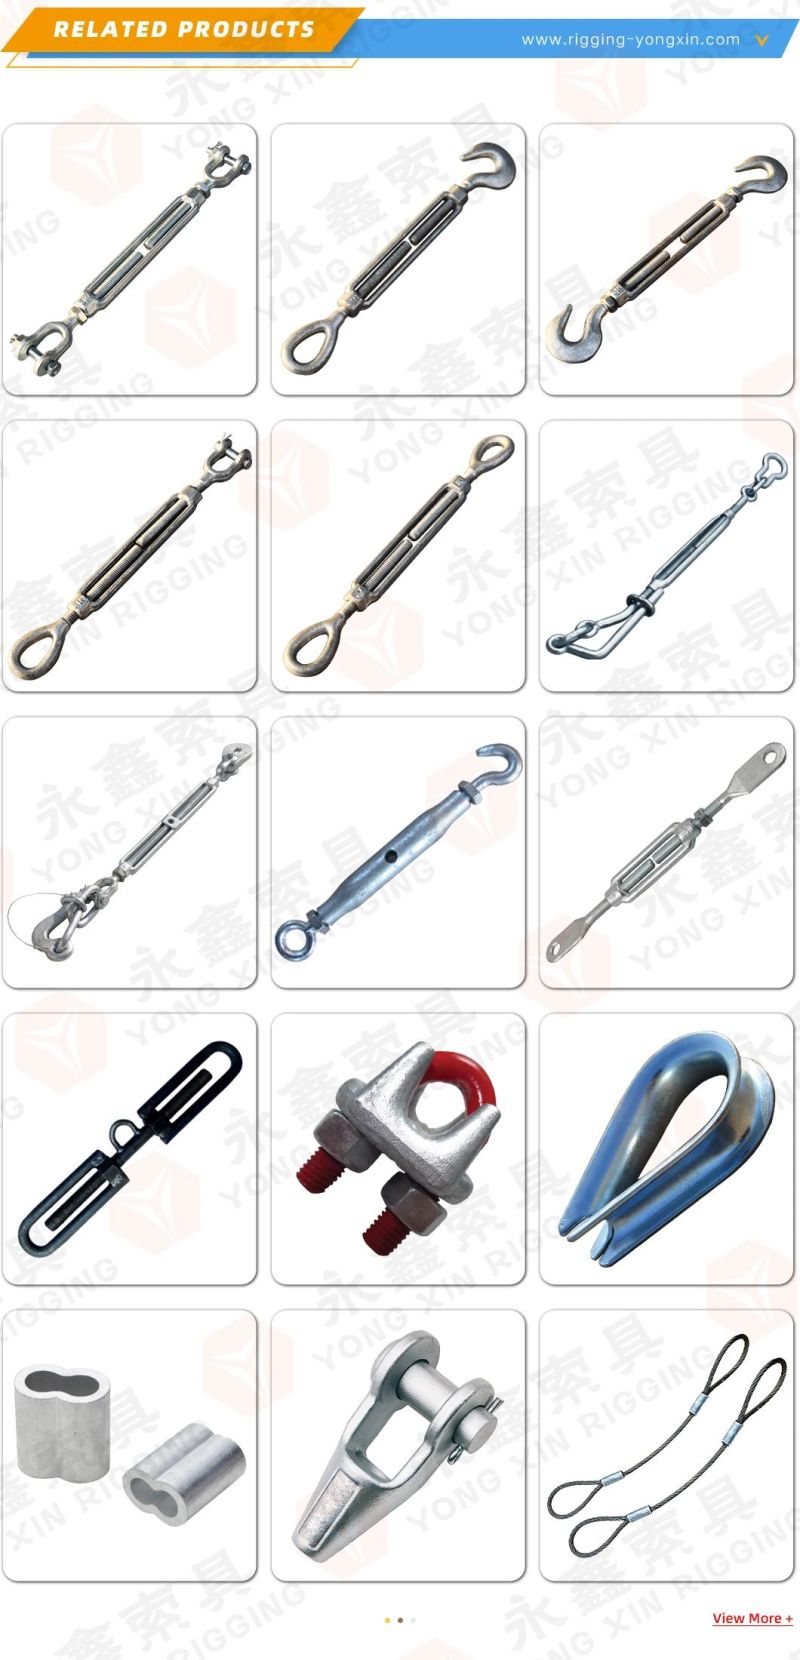 High Polished Stainless Steel Turnbuckle Body Rigging Hardware Stainless Steel Turnbuckles Eye Jaw